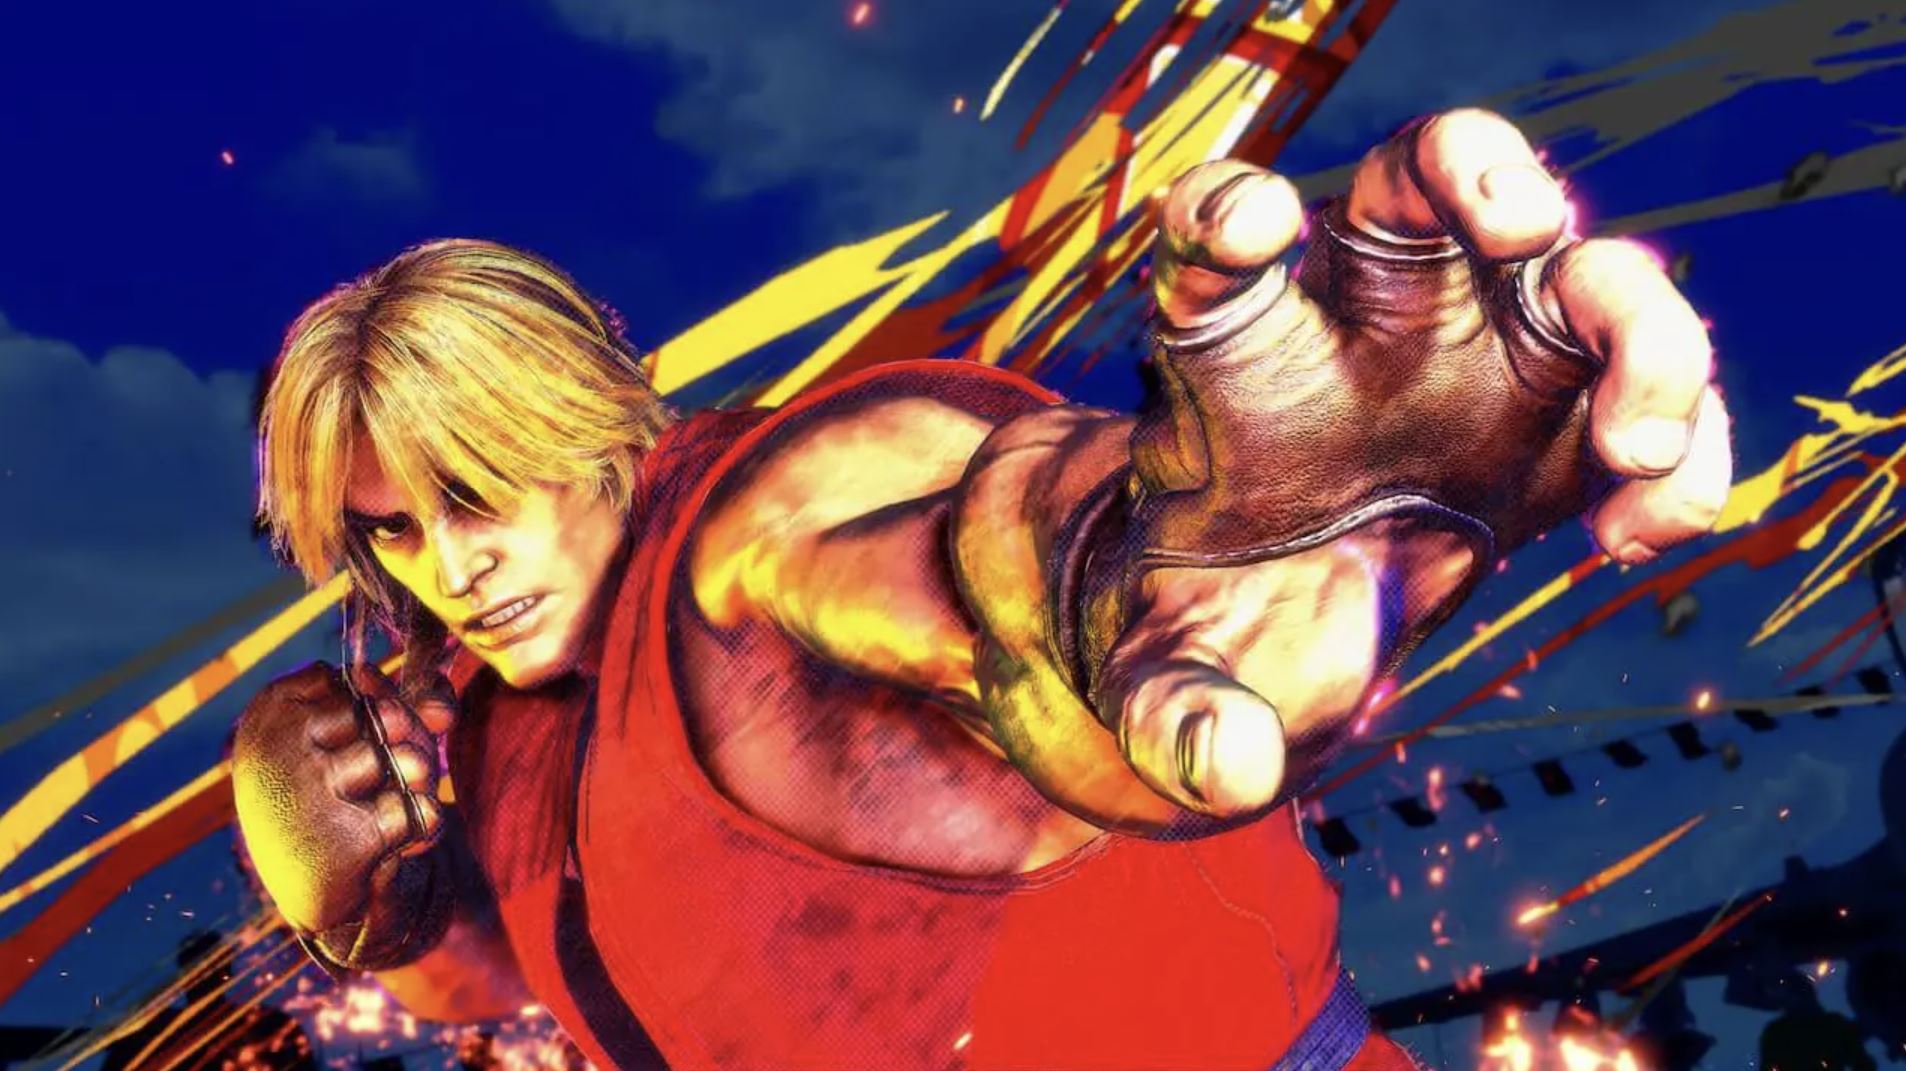 Street Fighter 6 Demo Out Now on PS4/PS5, Next Week on PC/Xbox